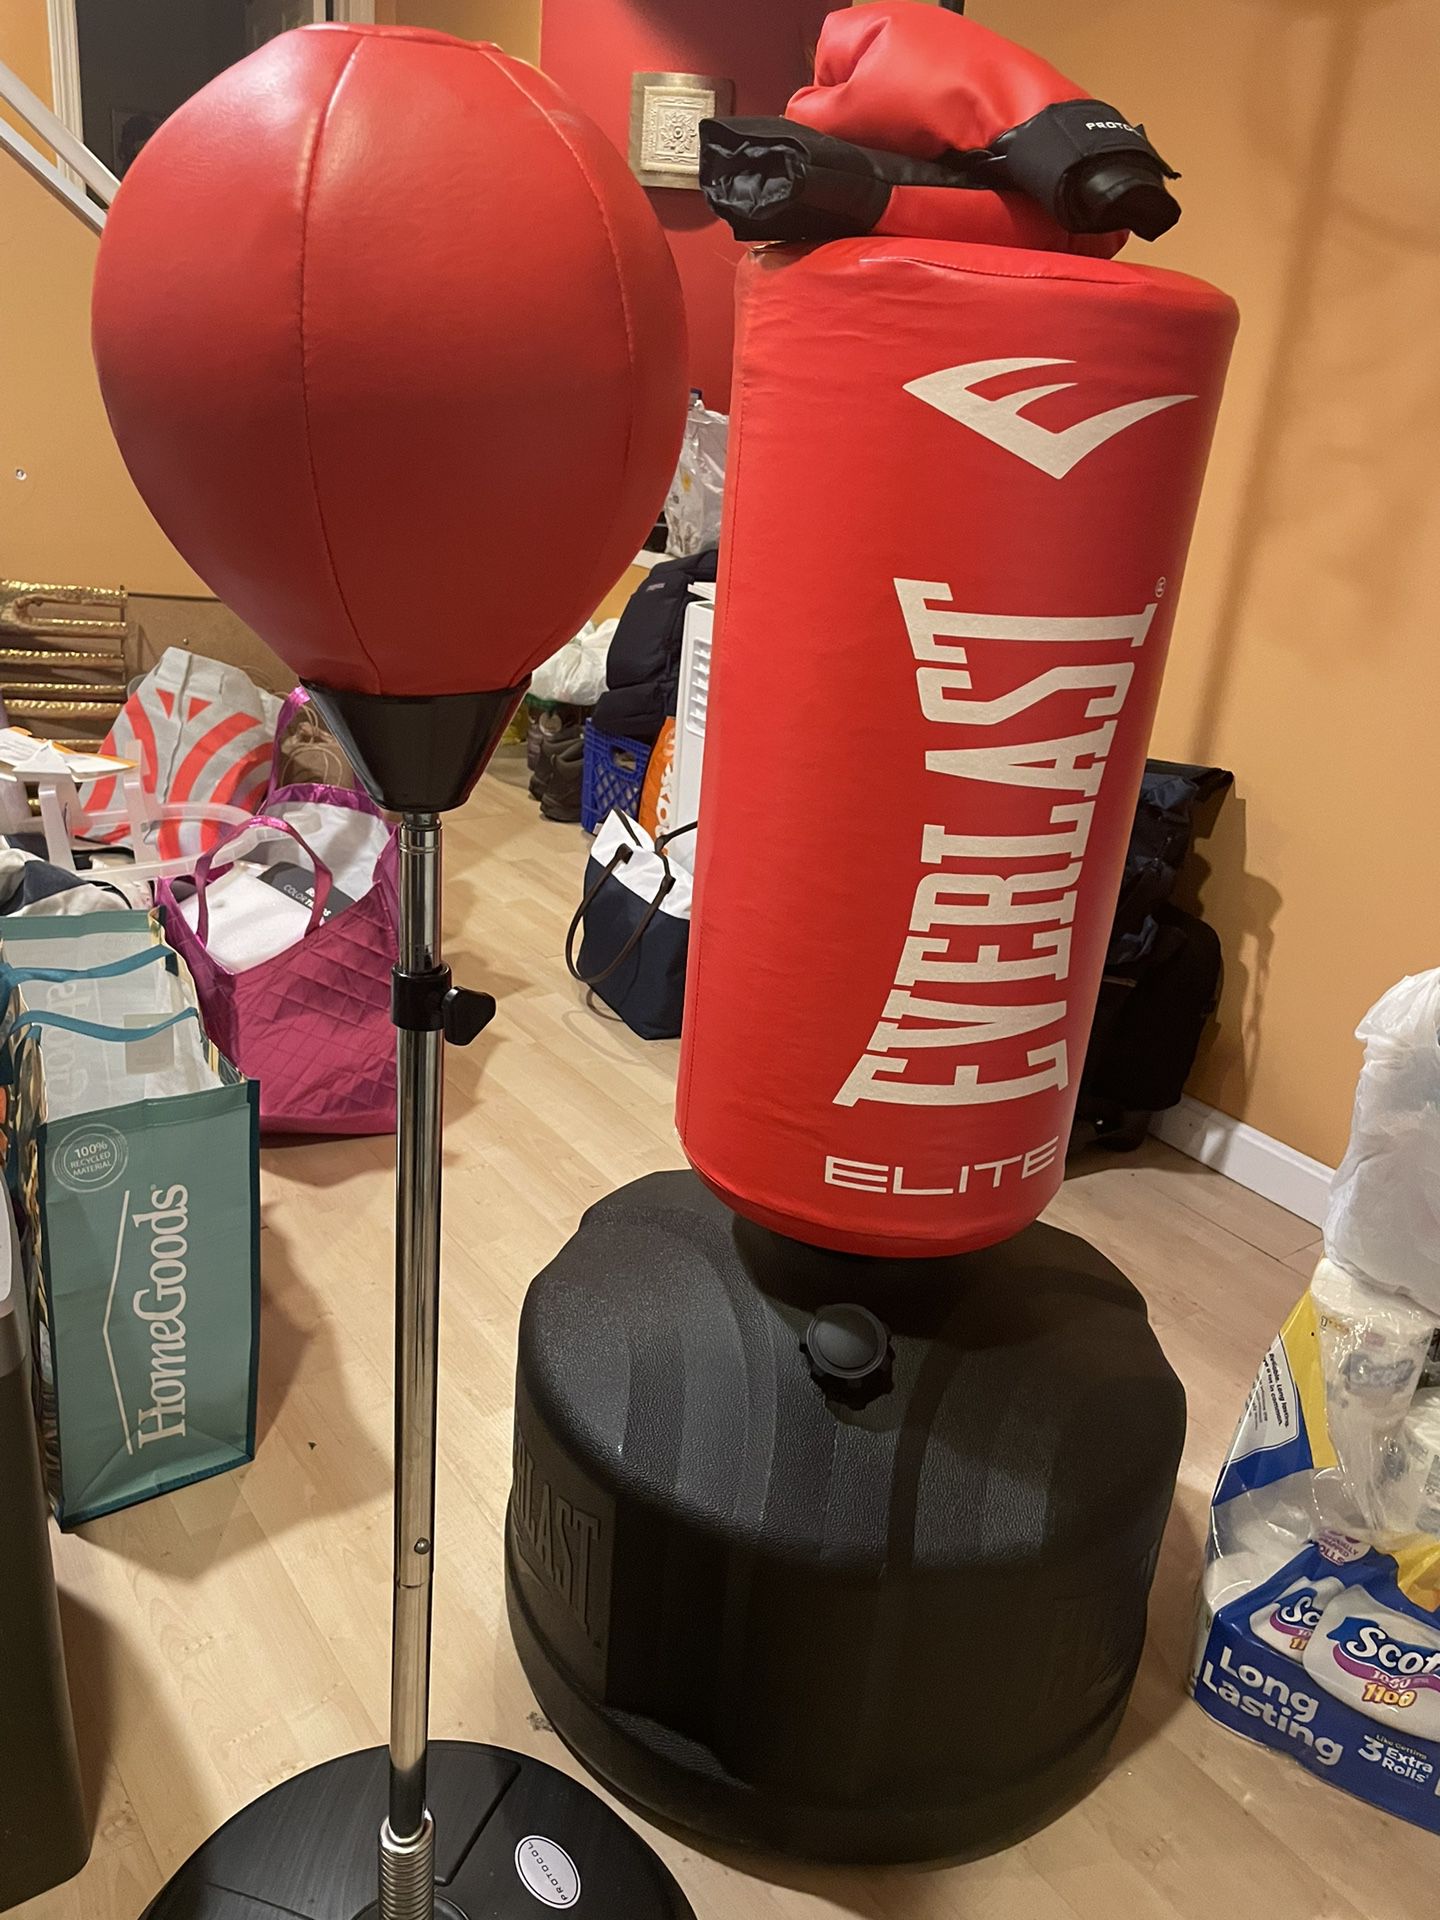 Everlast Punching bag (with) reflex bag and glove